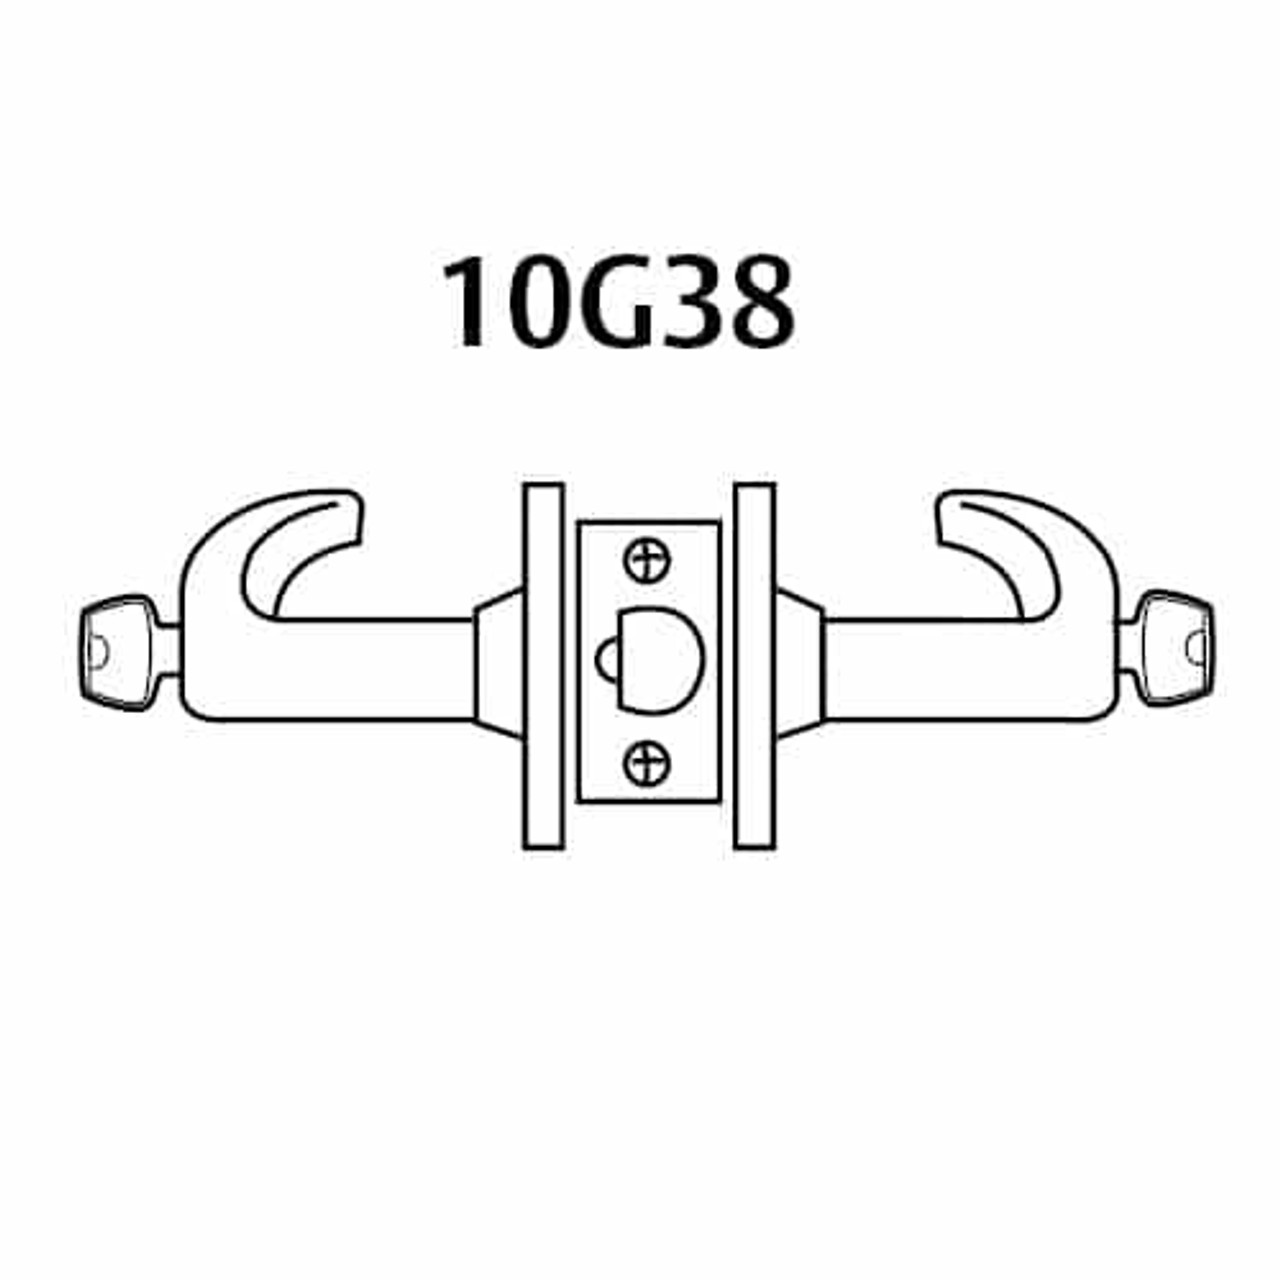 2860-10G38-GL-10B Sargent 10 Line Cylindrical Classroom Locks with L Lever Design and G Rose Prepped for LFIC in Oxidized Dull Bronze